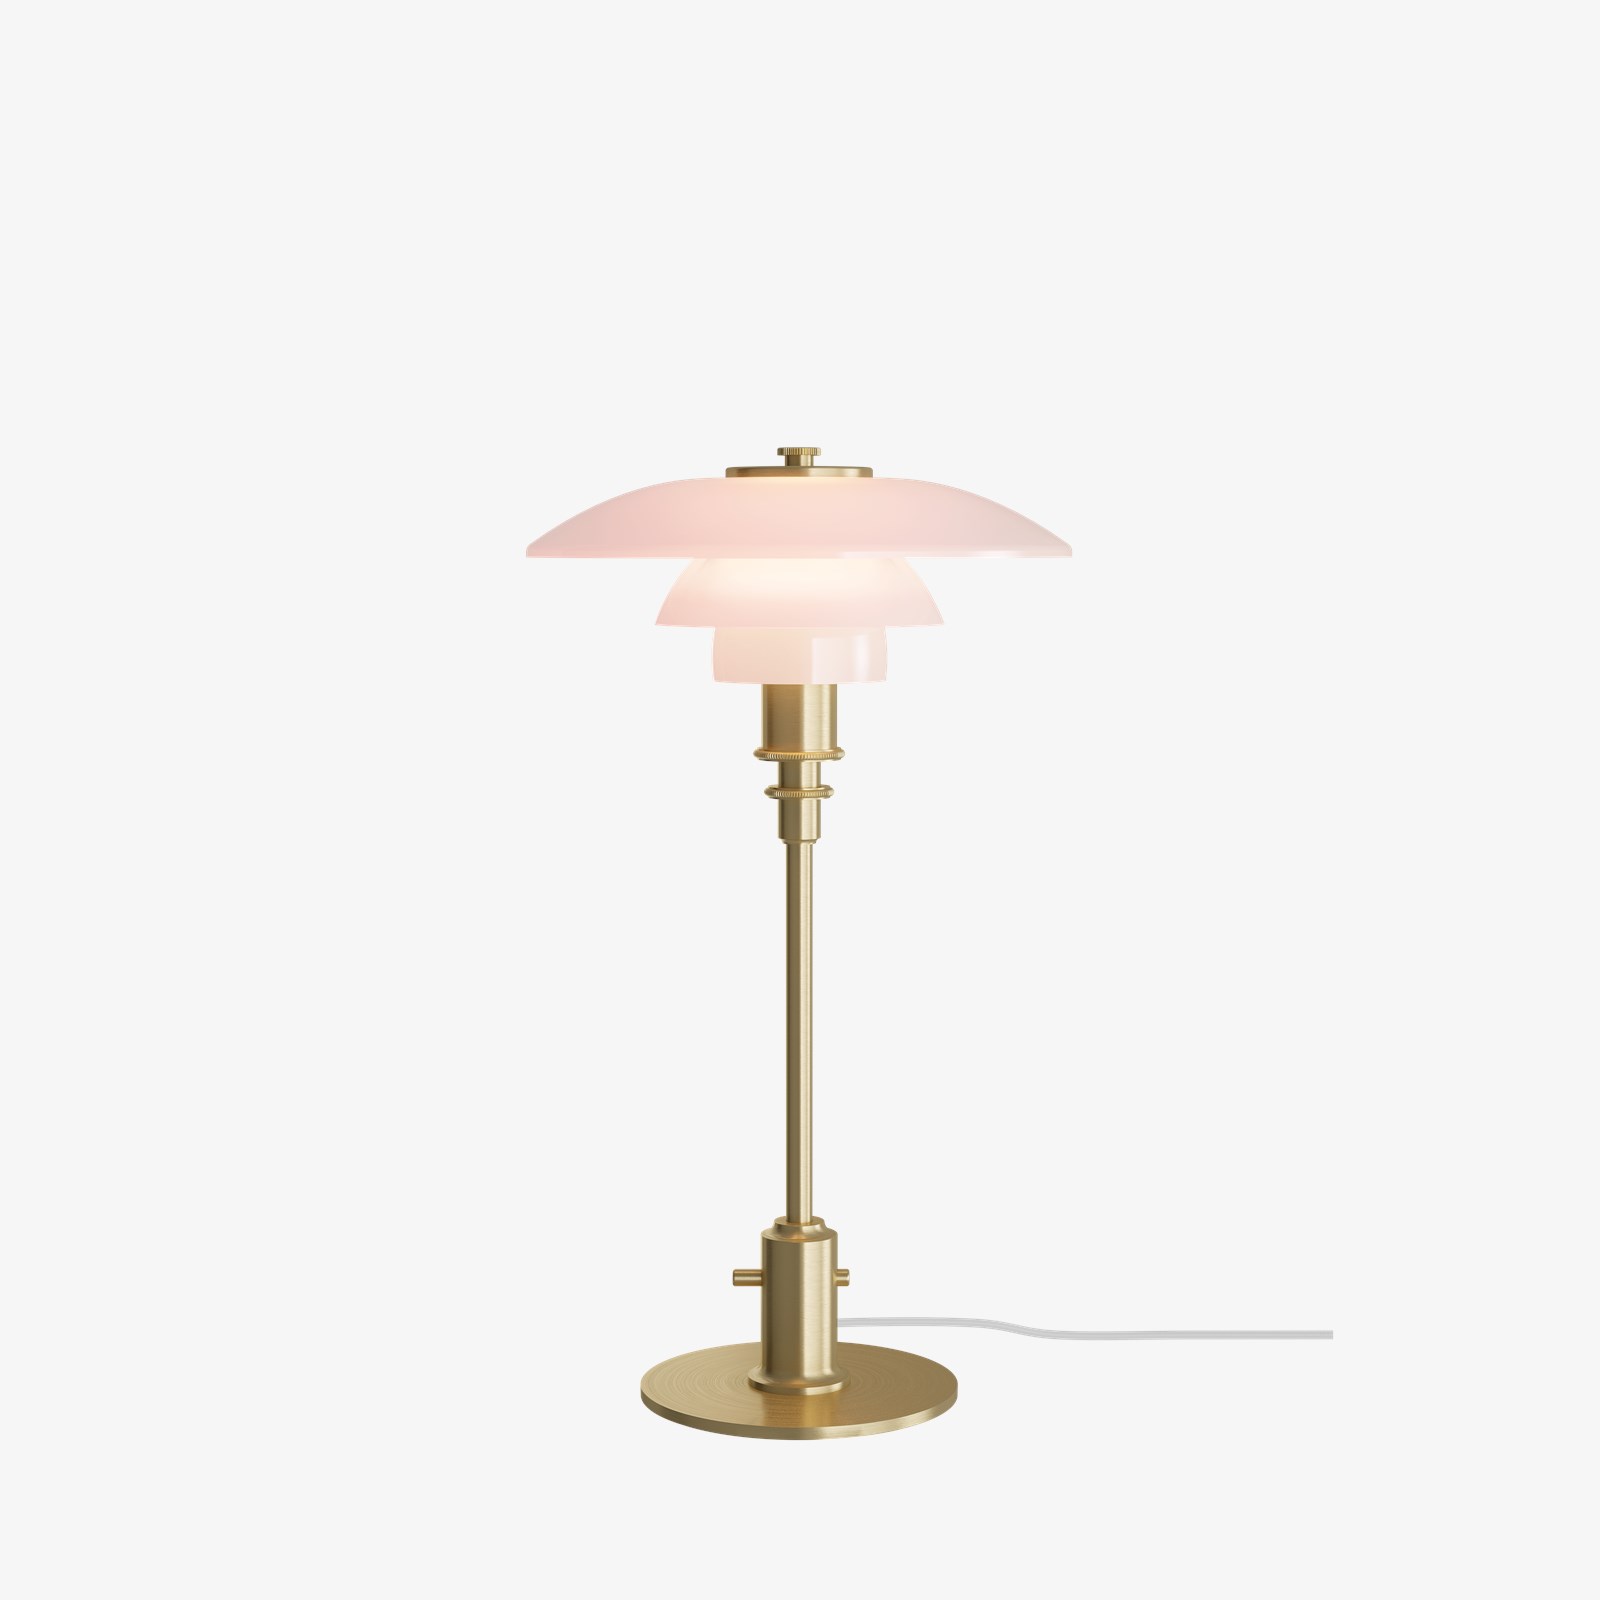 Louis Poulsen PH 2/1 Table Lamp now available at Nordic Urban in Berlin